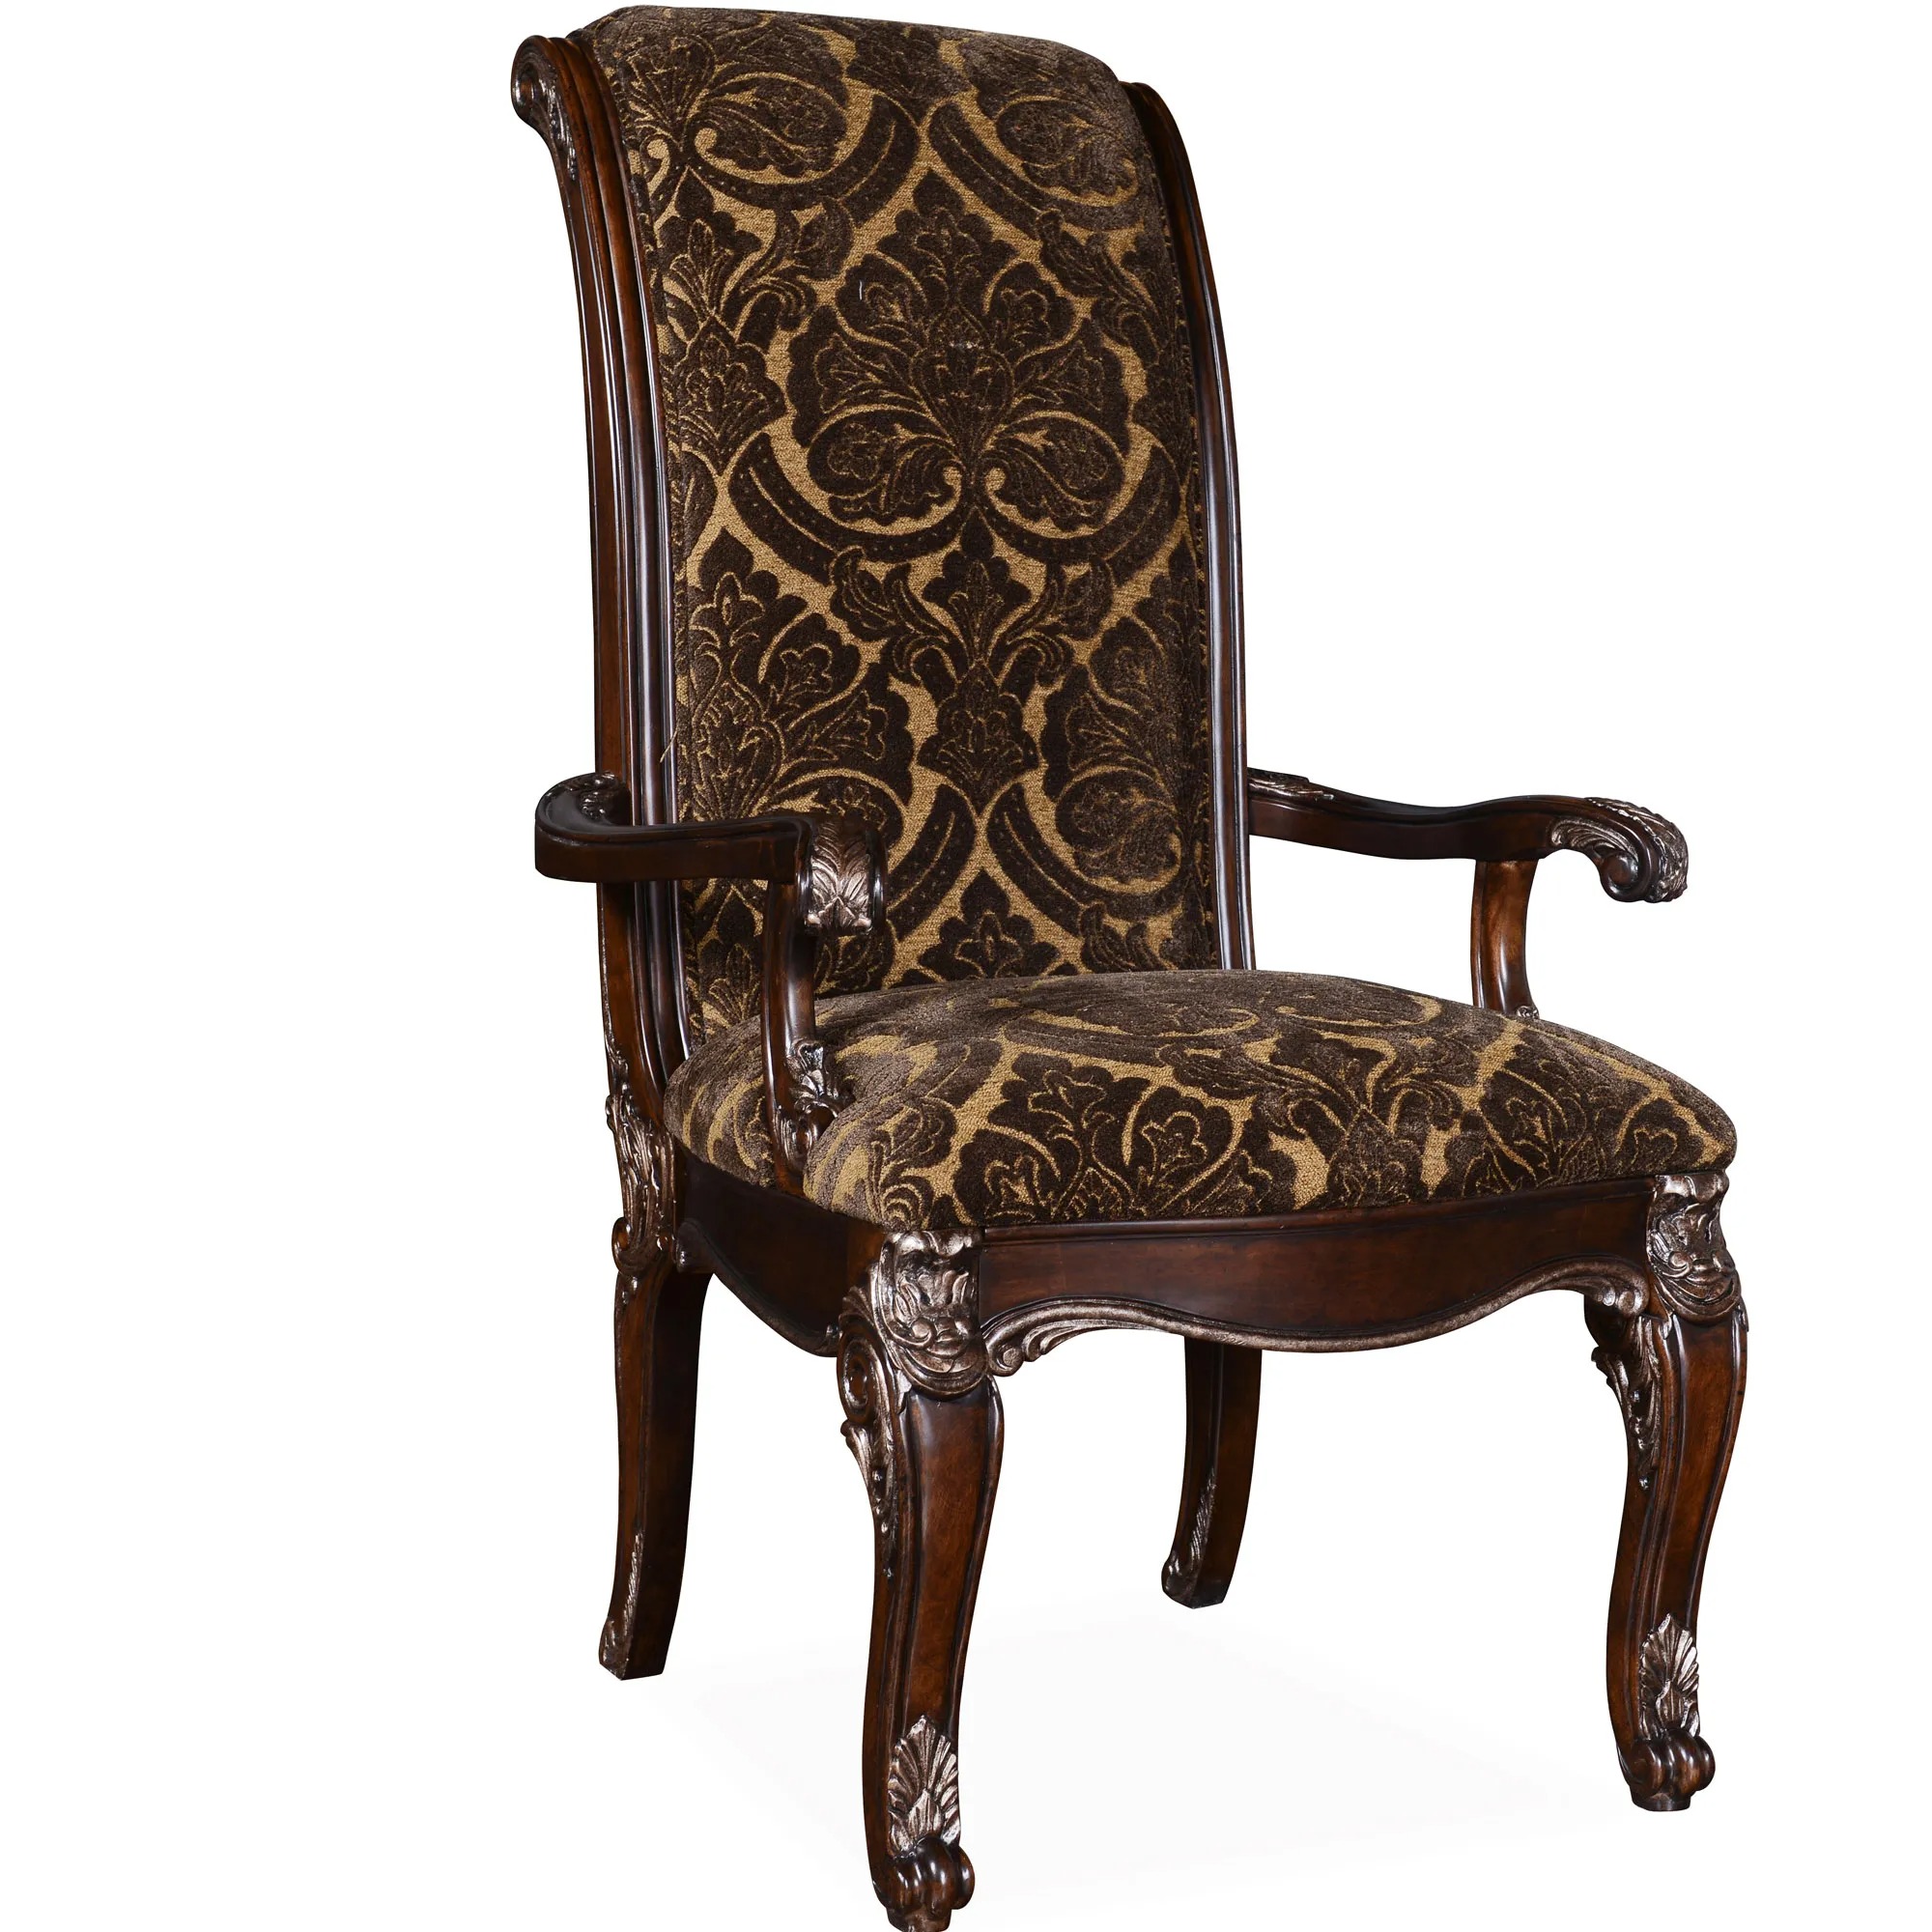 GABLES - UPH. BACK ARM CHAIR